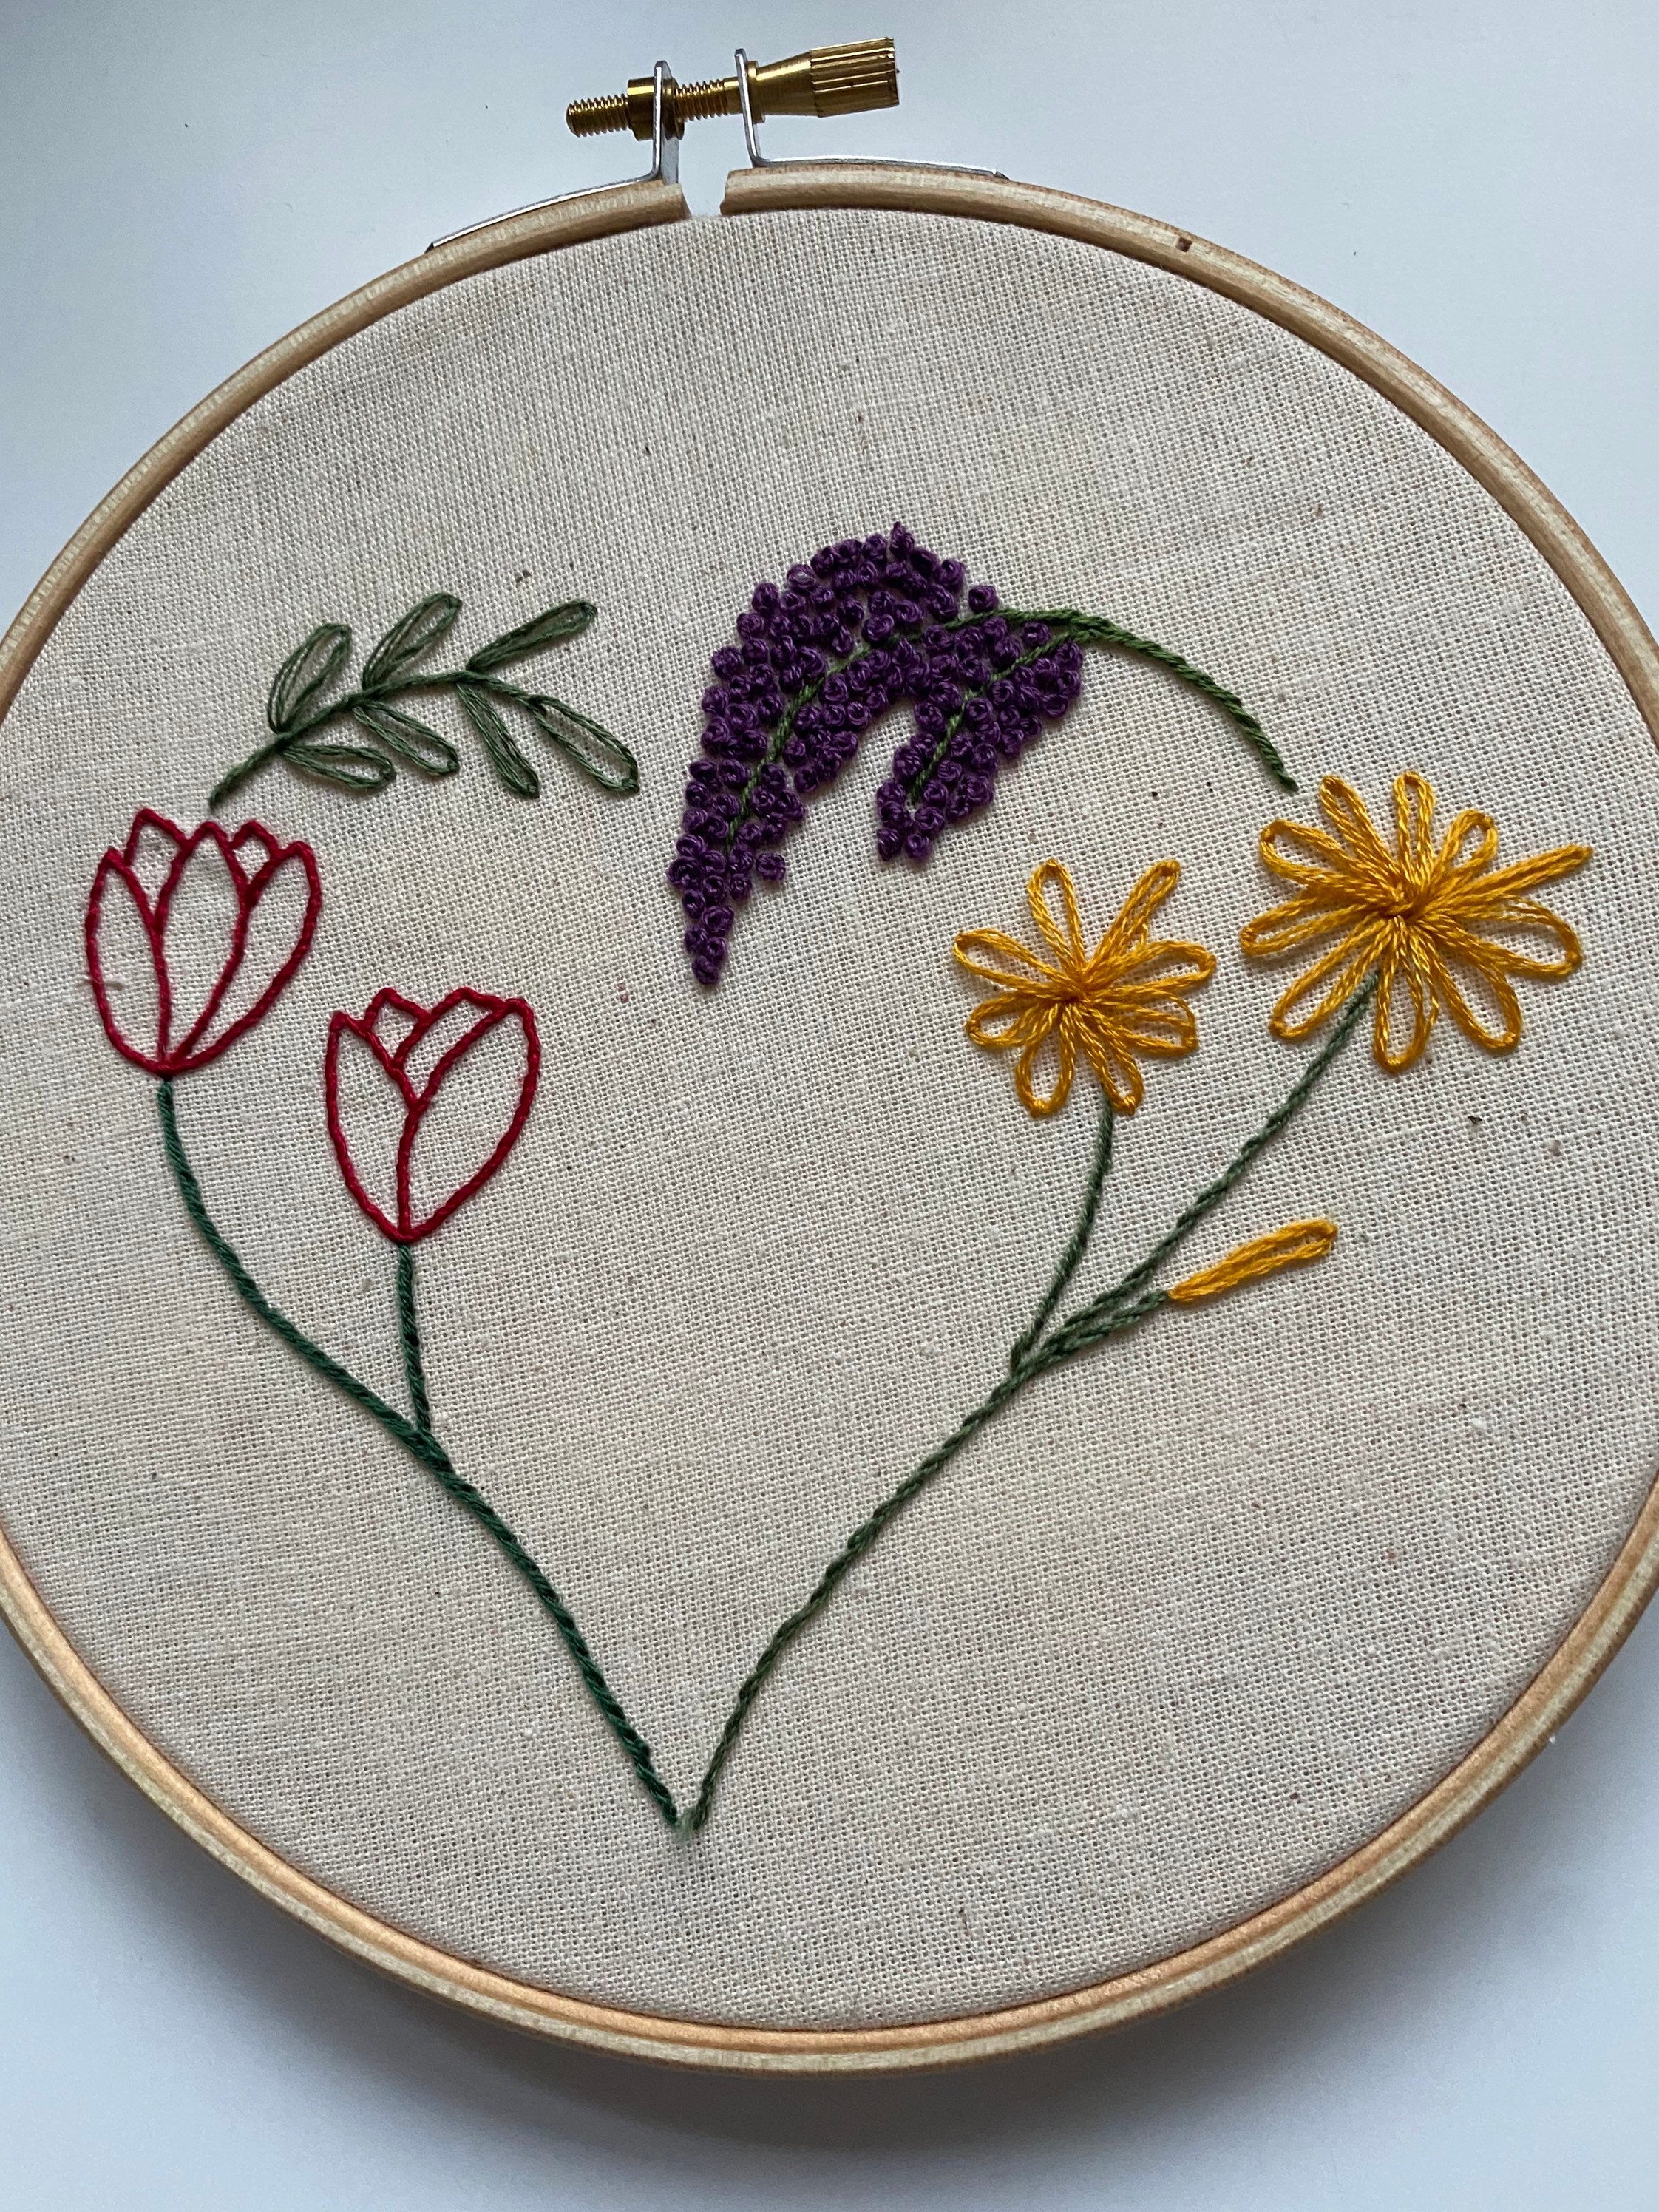 Abstract Embroidery, 4 Inch Embroidery Hoop Art, Abstract Fiber